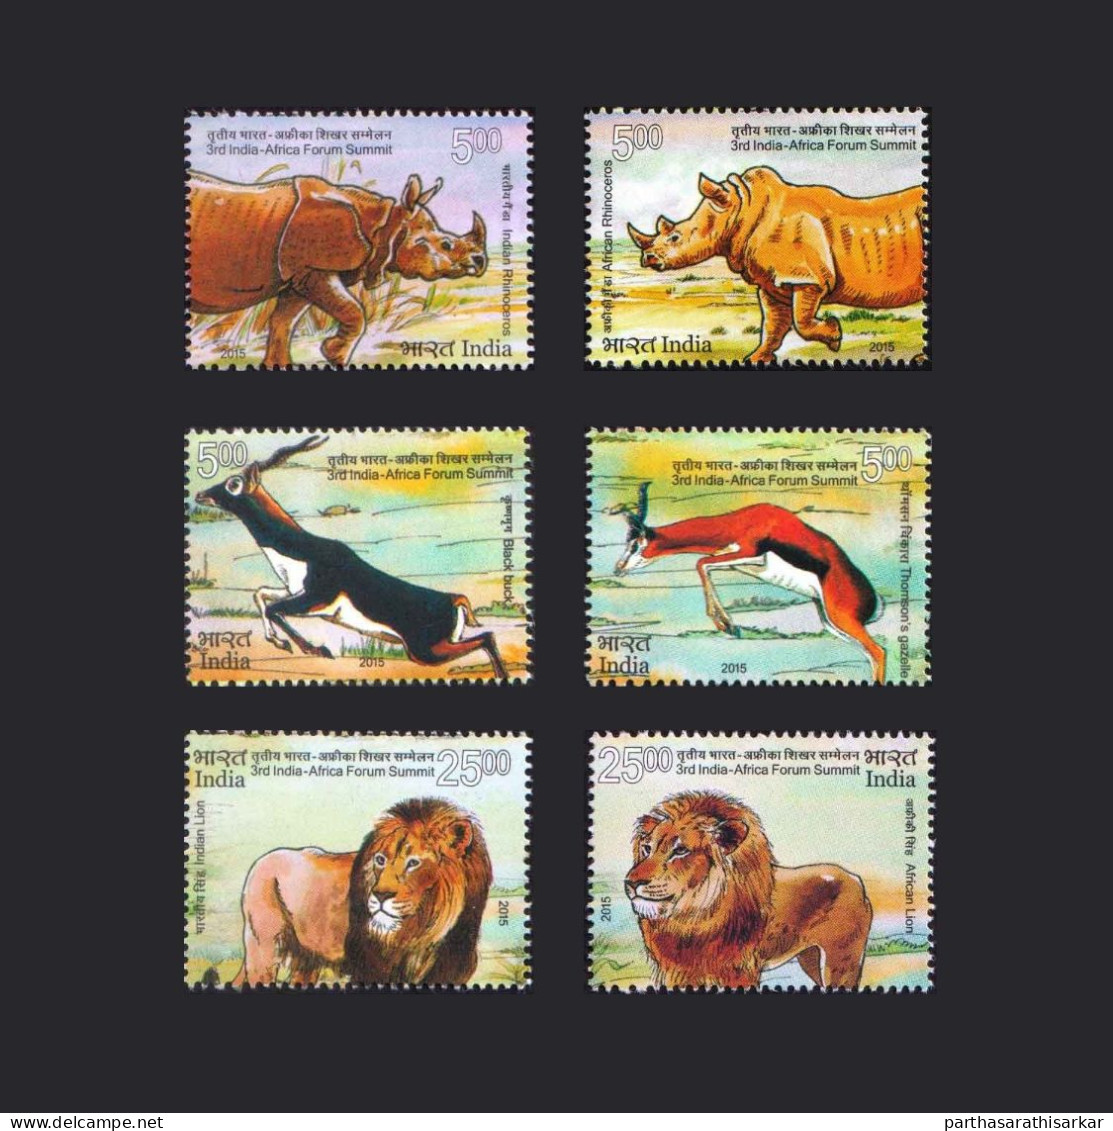 INDIA 2015 3RD INDIA-AFRICA FORUM SUMMIT FAUNA ANIMALS COMPLETE SET OF 6V STAMPS MNH - Neufs